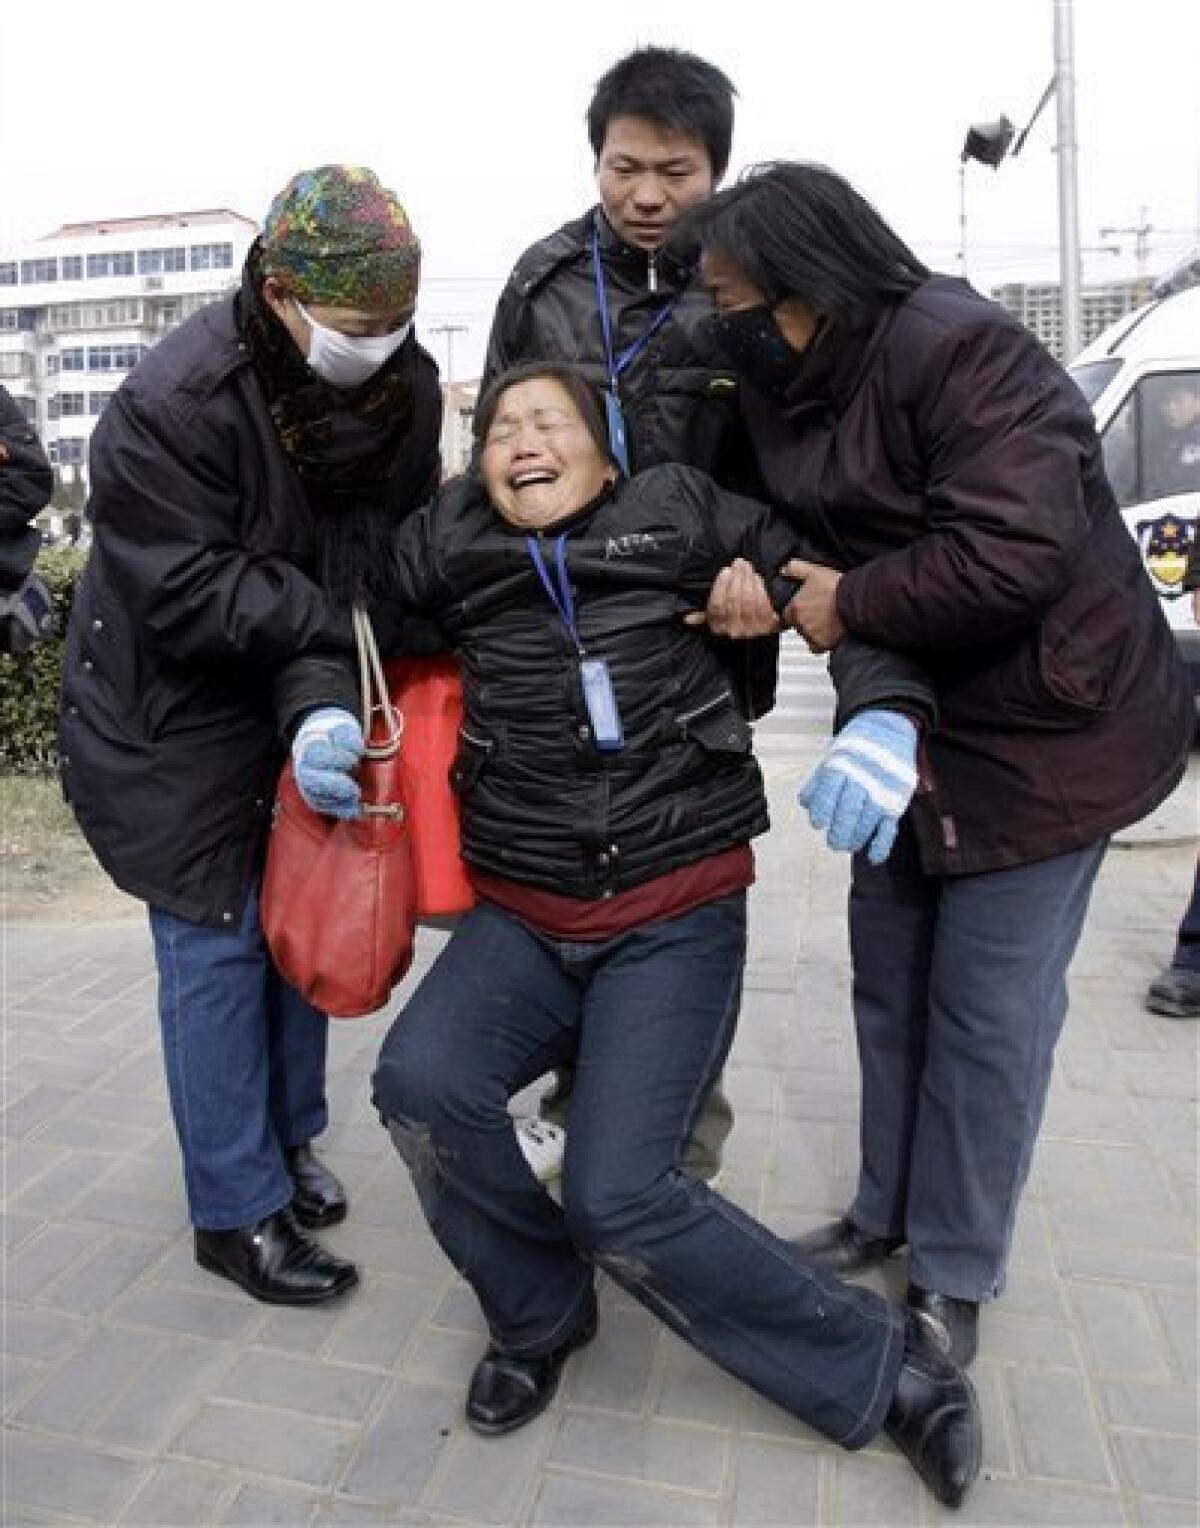 Zheng Shuzhen, center, the grandmother of a baby who died after drinking tainted milk, is supported by friends as she cries outside the Intermediate People's Court in Shijiazhuang, in China's Hebei province Thursday Jan. 22, 2009. Verdicts and sentencing were expected at the court Thursday for 21 people charged in the tainted milk scandal. (AP Photo/Greg Baker)